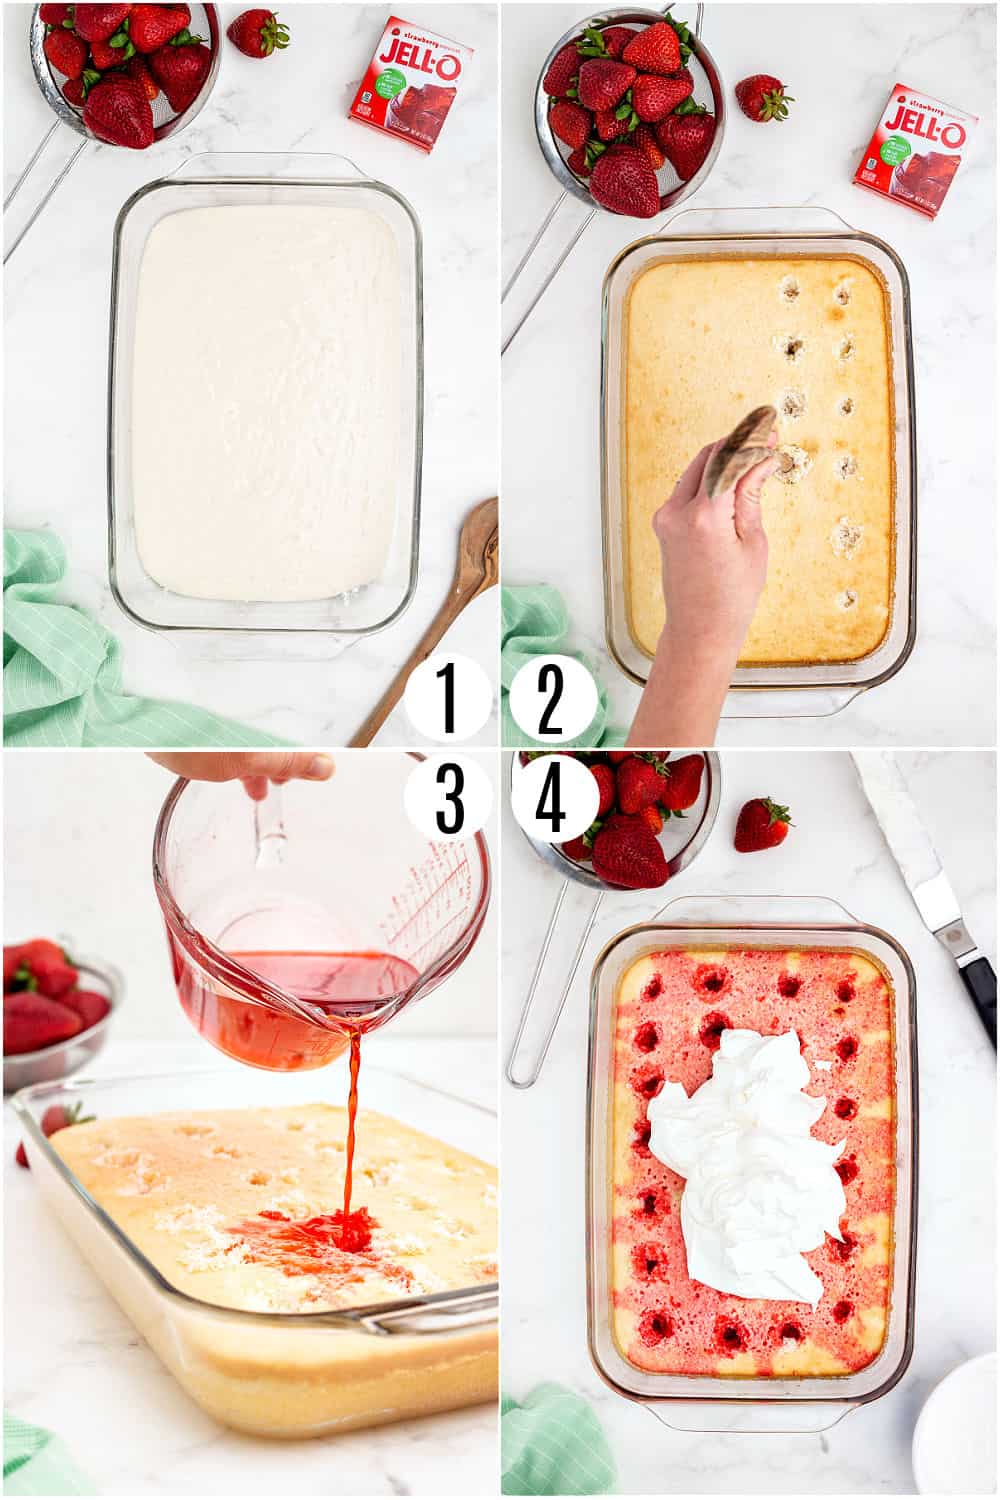 Step by step photos showing how to make jello poke cake with strawberry gelatin mix.